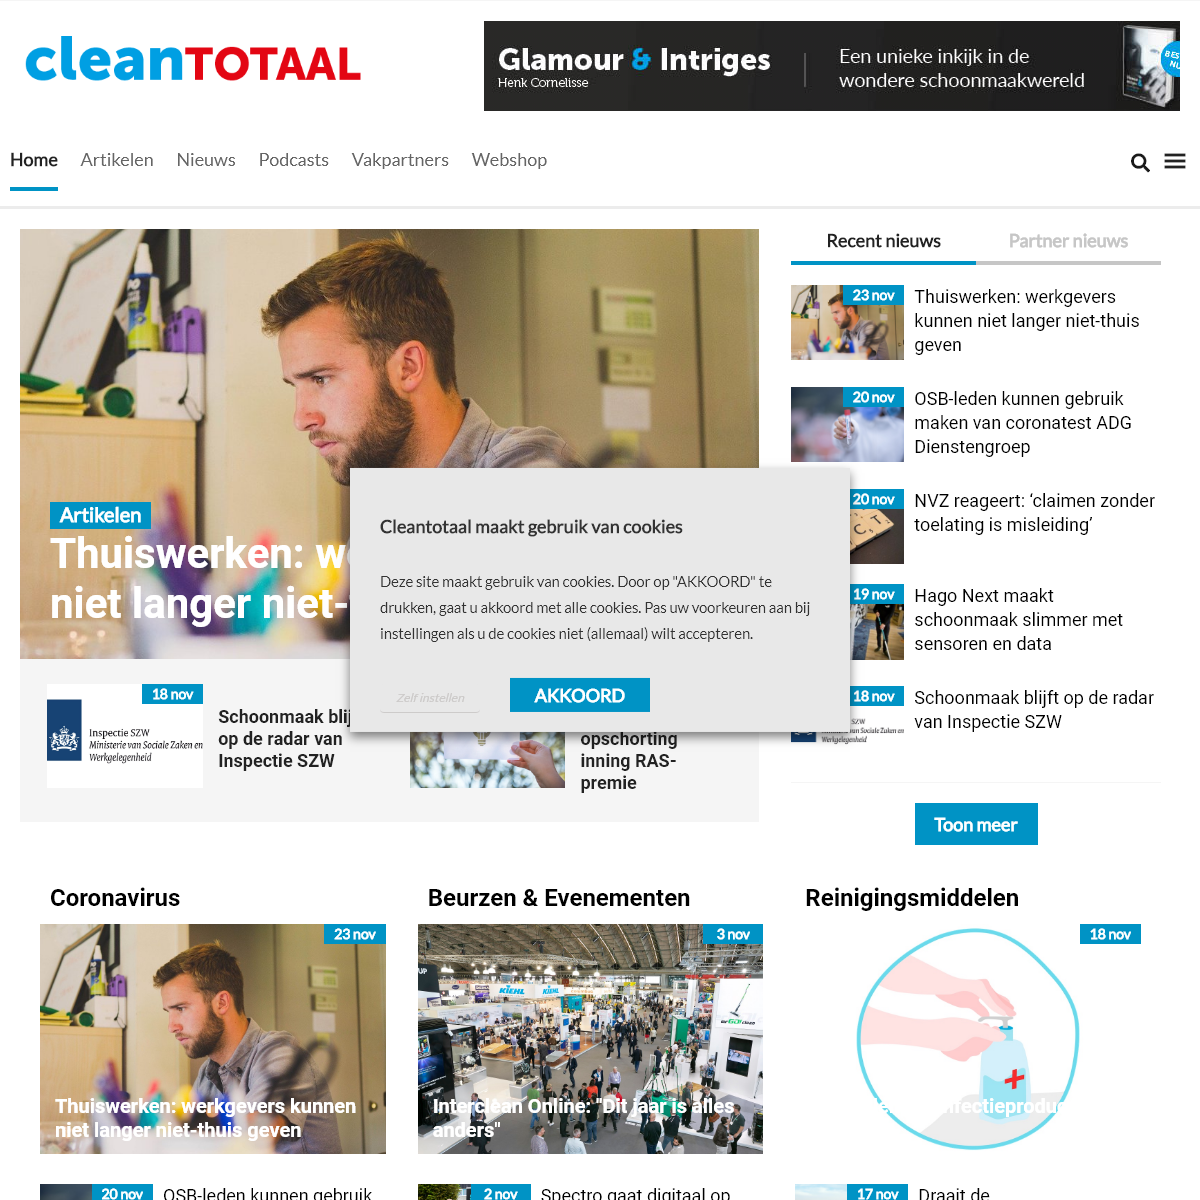 A complete backup of cleantotaal.nl